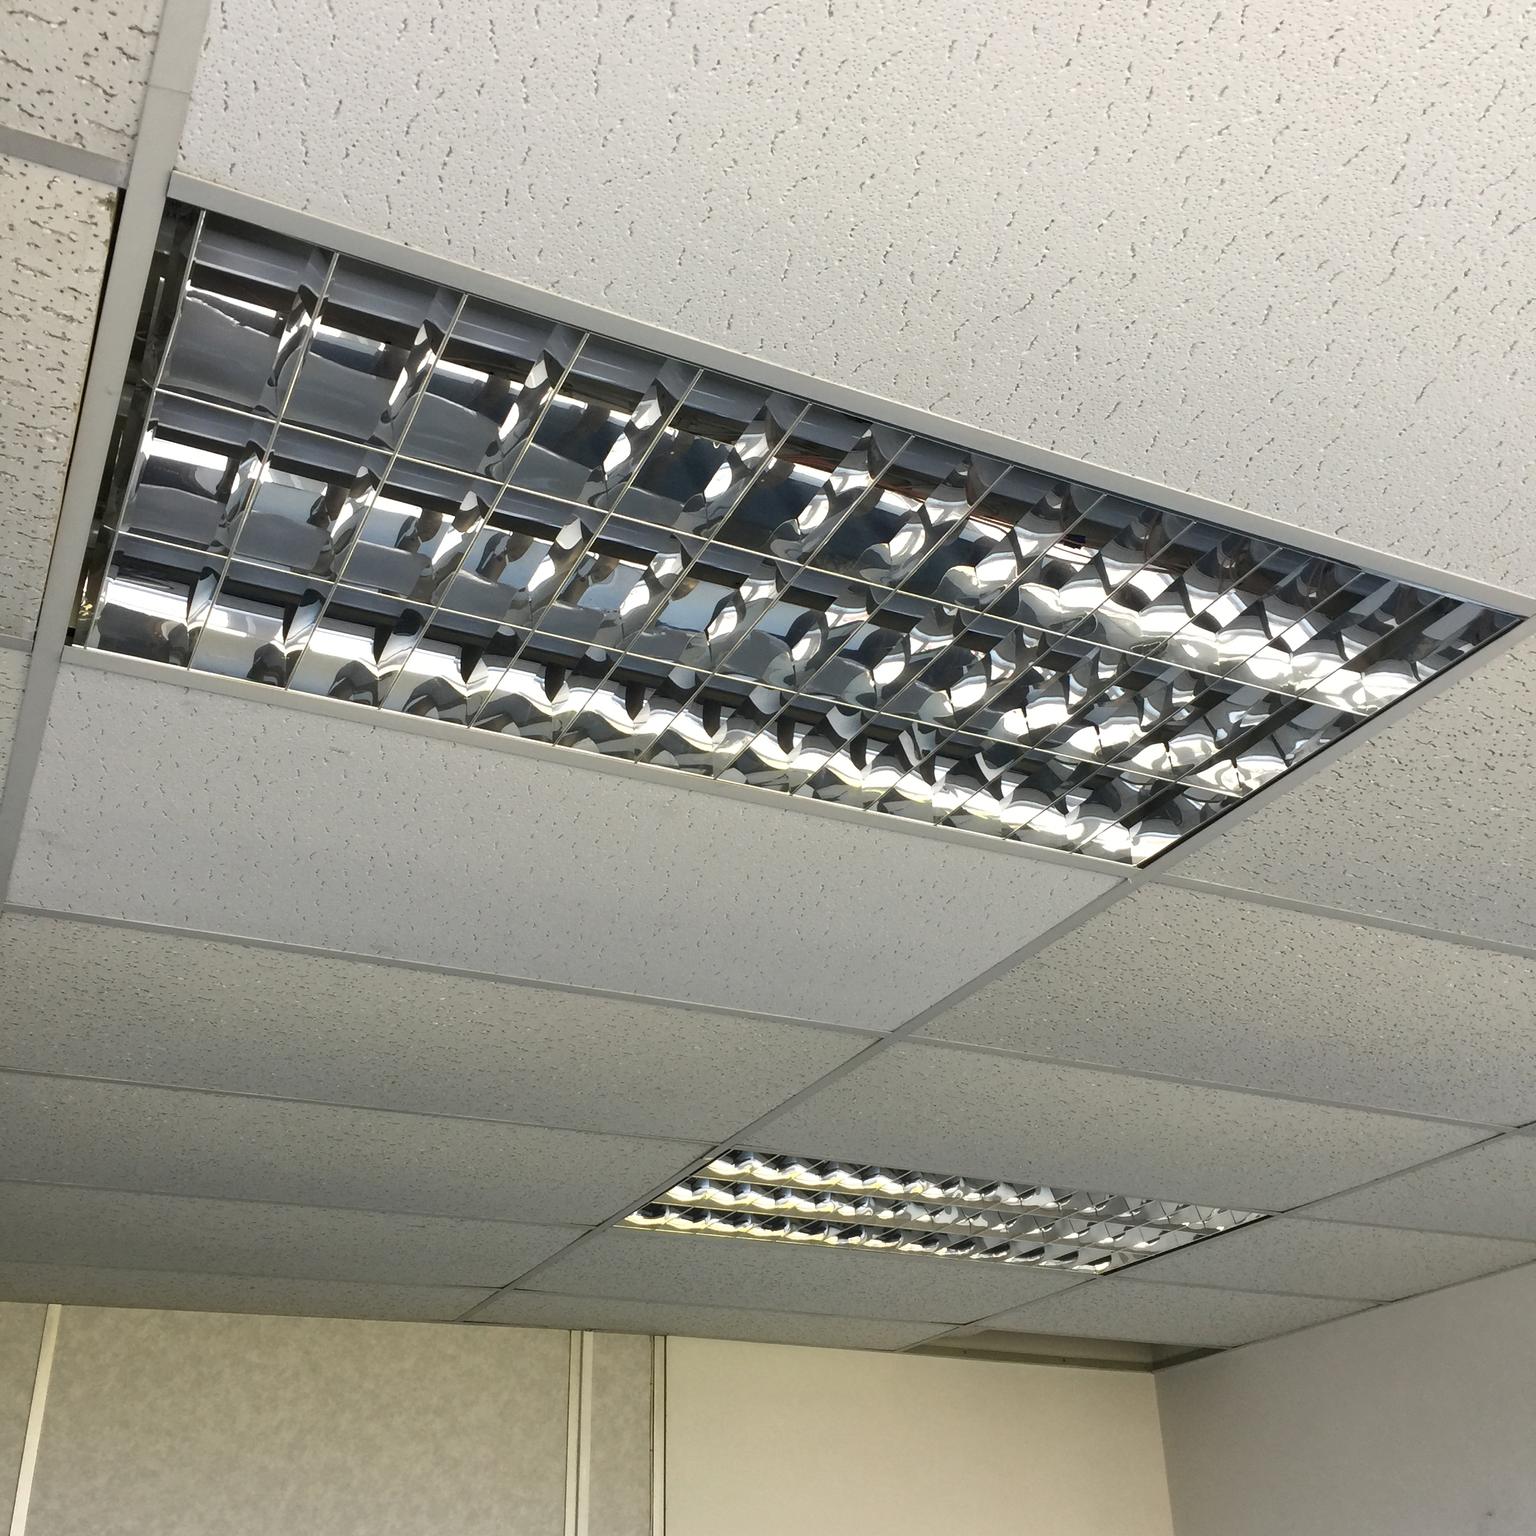 Suspended Ceiling Lights 1200 X 600 In Wv2 Wolverhampton For 7 00